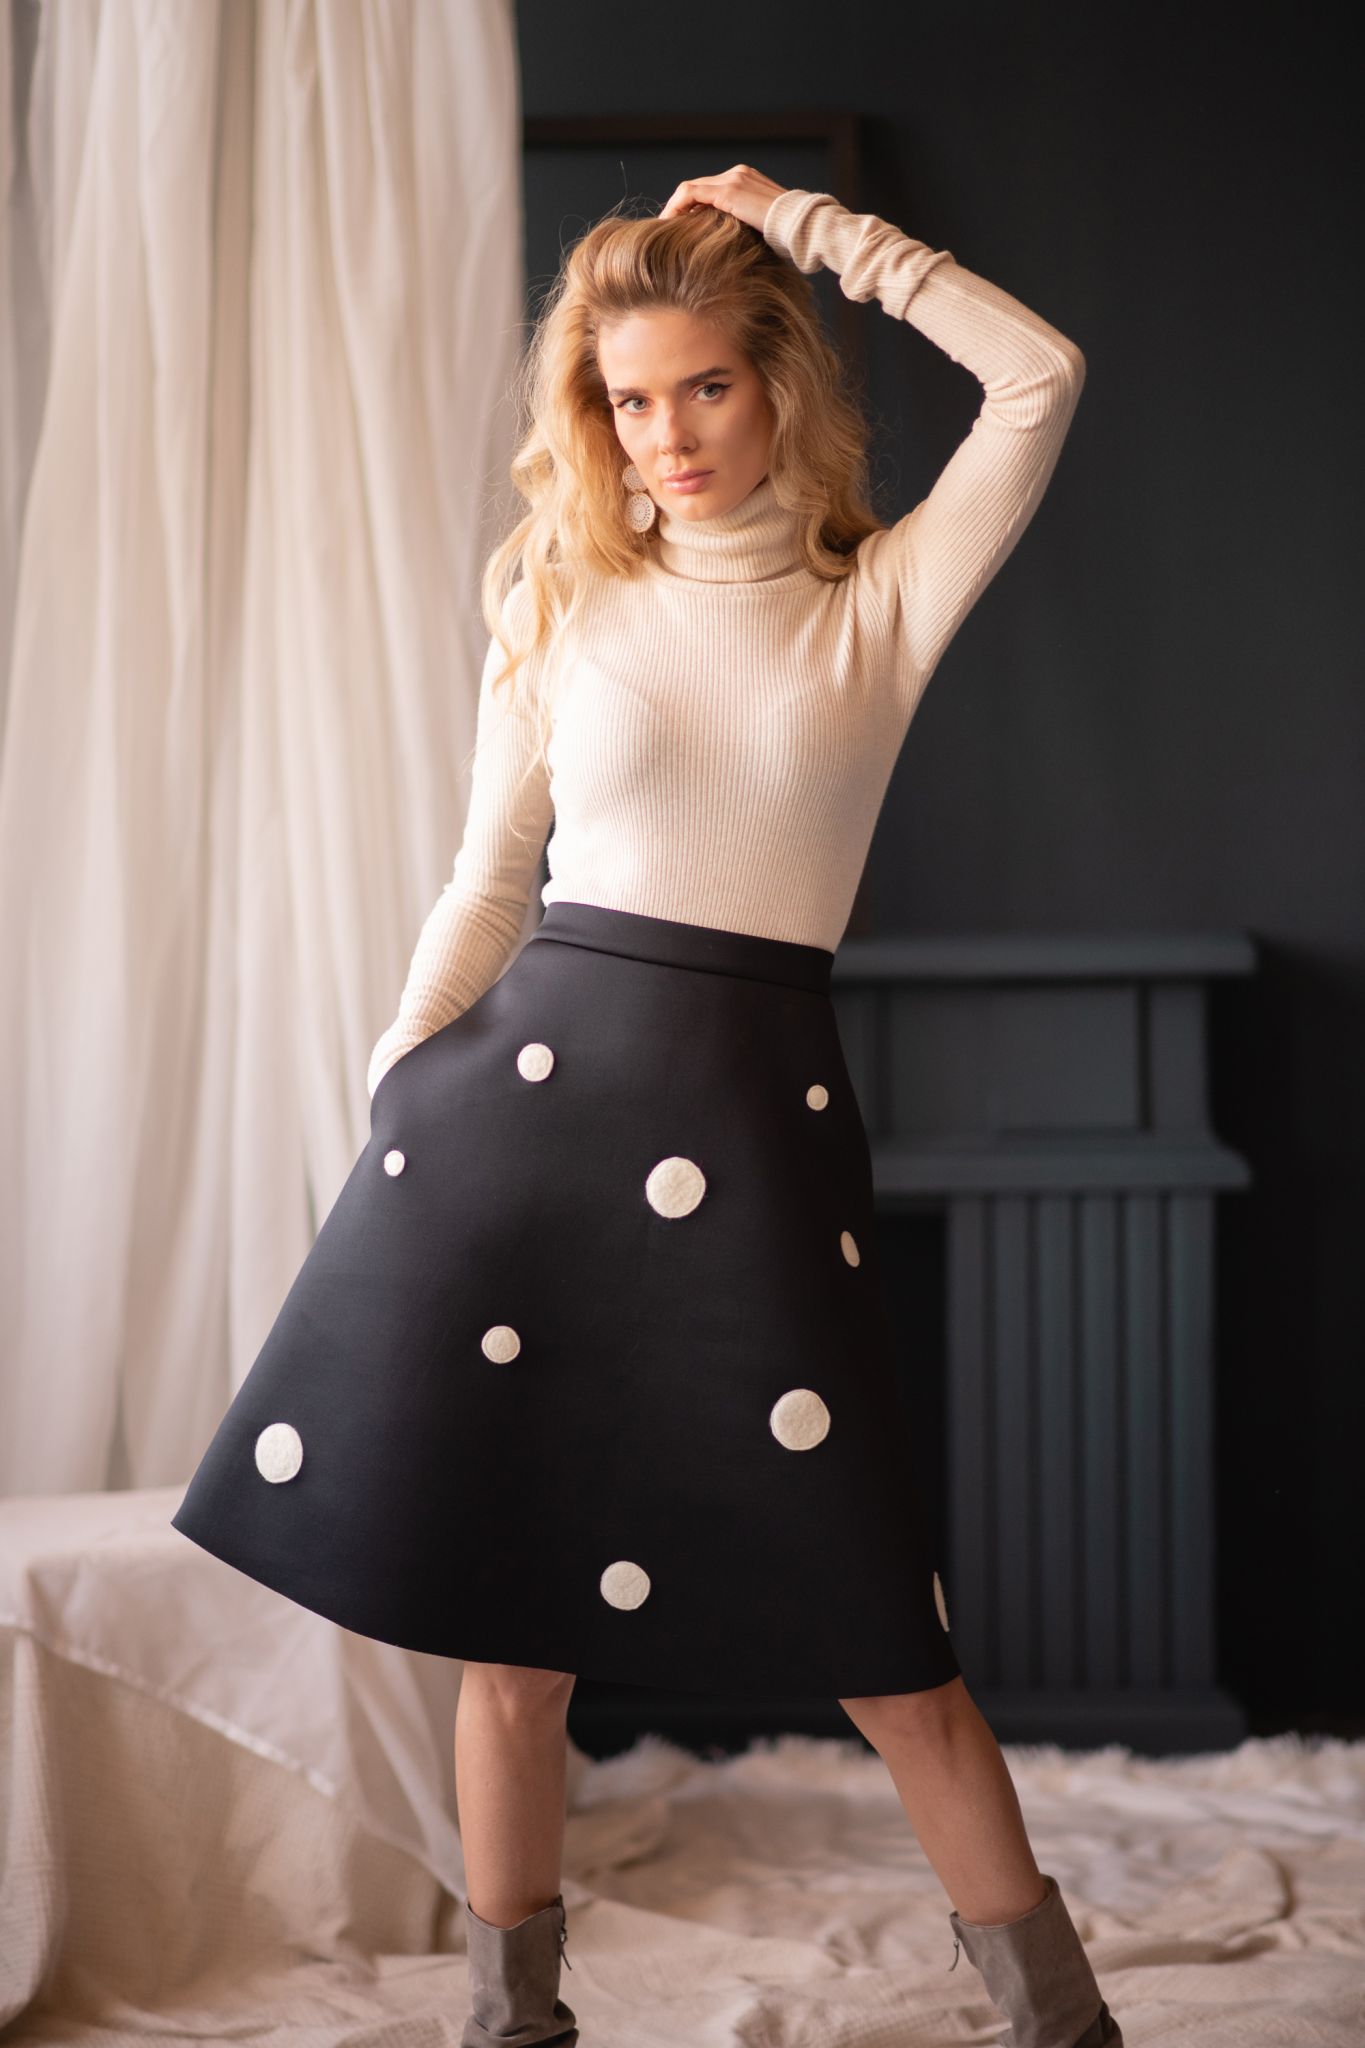 sewing machine ballet conjunction Playing dots skirt - Happy Friday